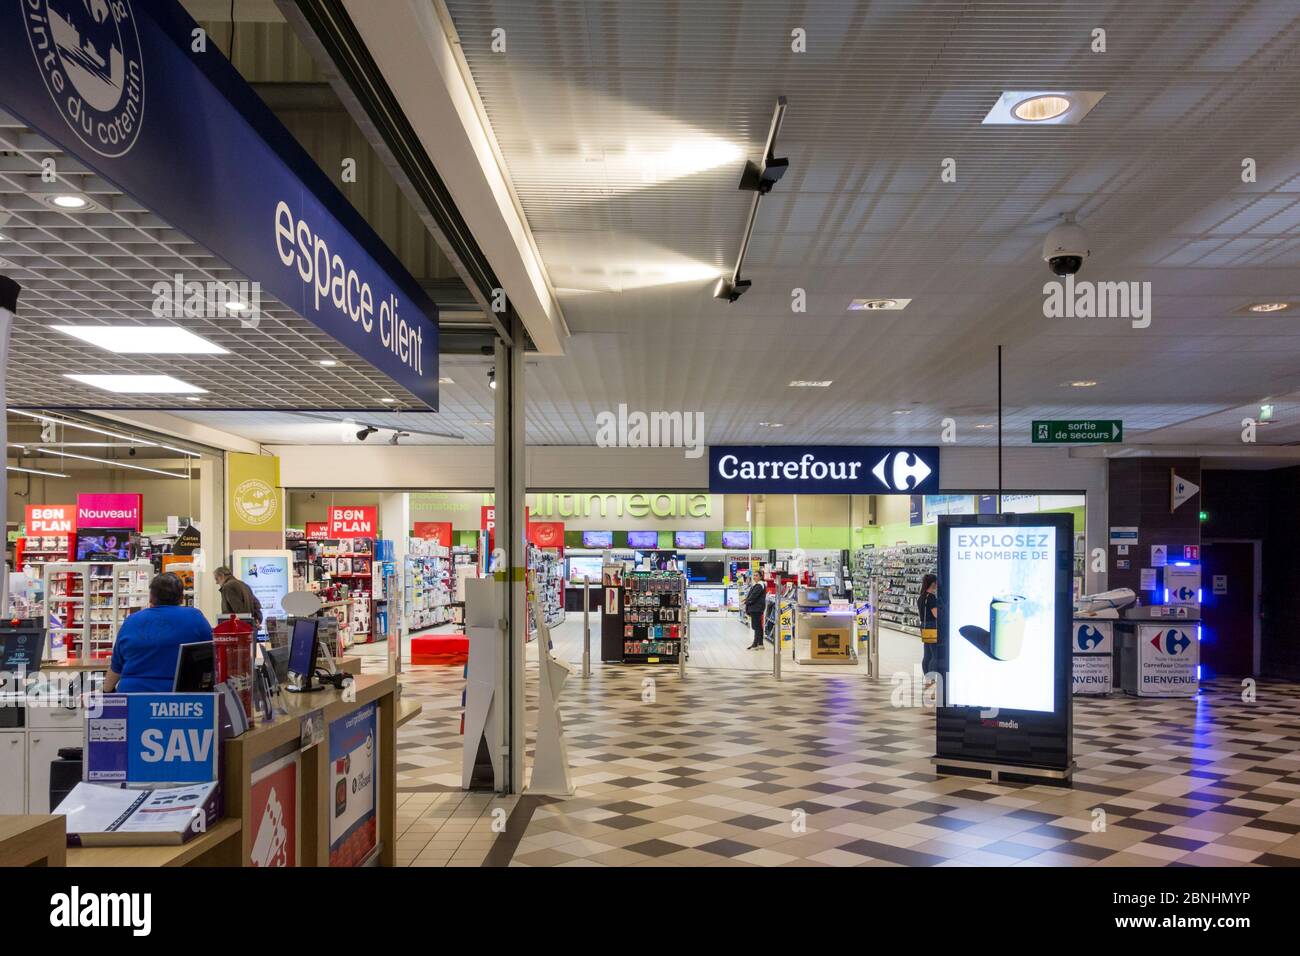 Carrefour Supermarket in Les Eleis shopping mall, Cherbourg, Normandy,  France Stock Photo - Alamy